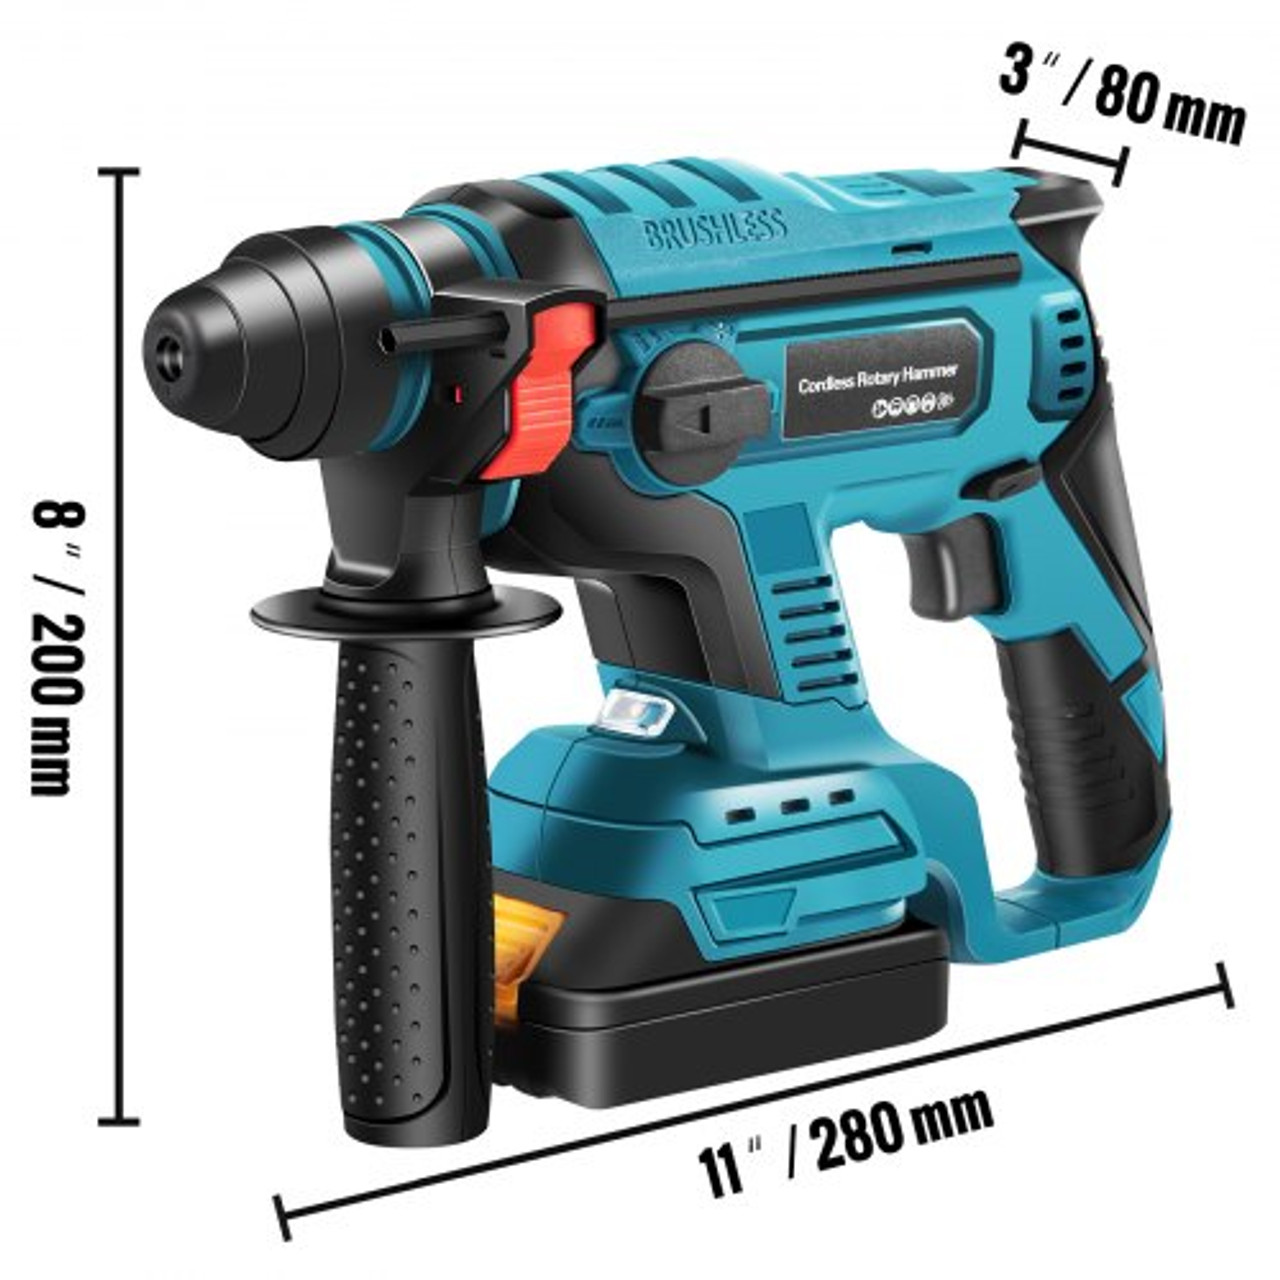 SDS-Plus Rotary Hammer Drill, 900 rpm & 450 bpm Variable Speed Electric Hammer, 4 Functions Cordless Drill w/ LED Light & Ruler, 360ø Rotary Handle Jack Hammer for Concrete, Steel, and Wood